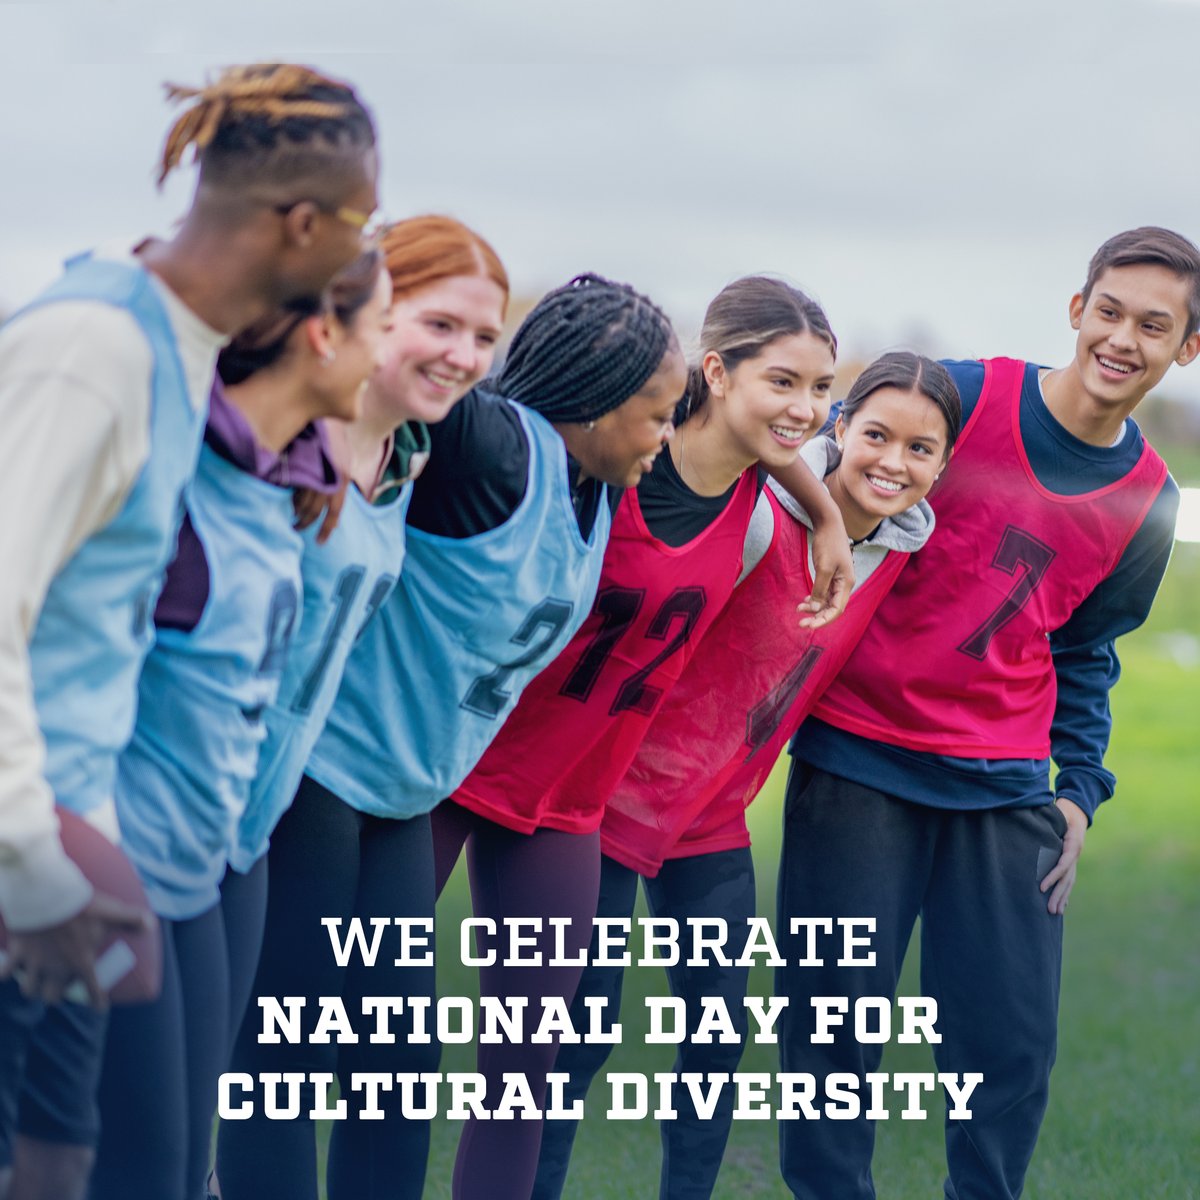 🌍 Celebrating unity in diversity on National Day for Cultural Diversity. Let's embrace our differences and learn from each other! #CulturalDiversityDay #PCA #Positivity #positive